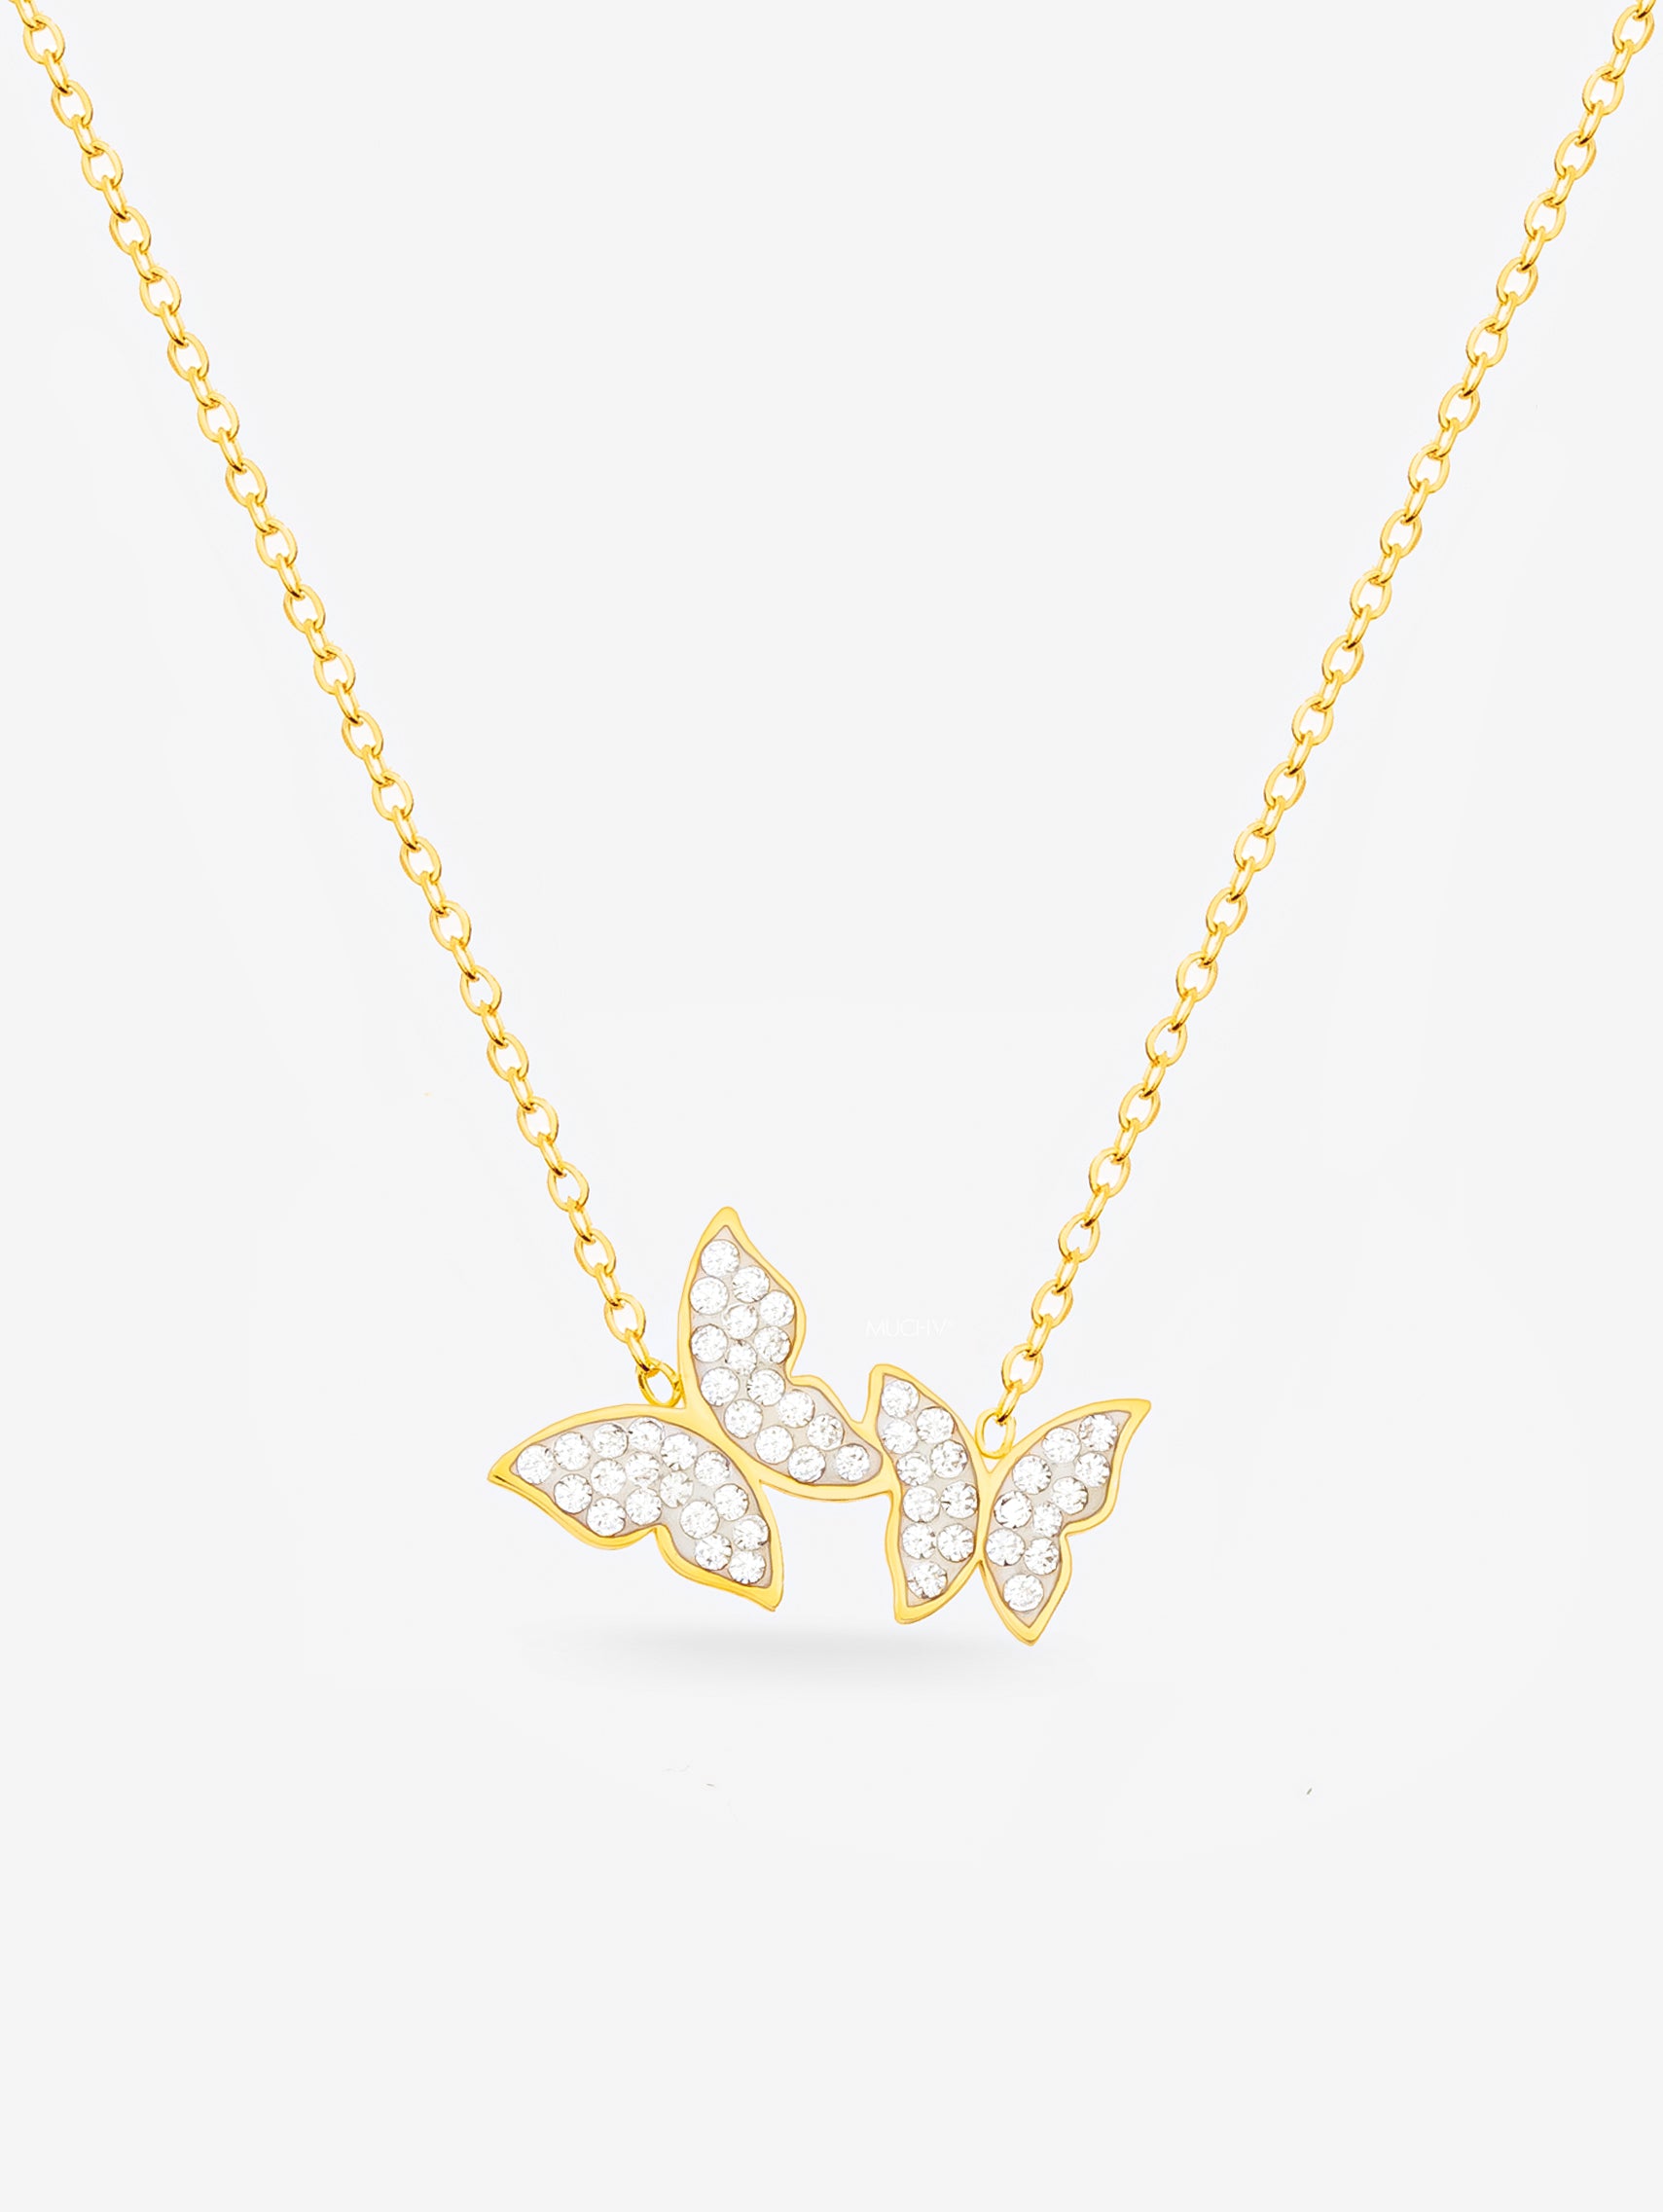 Gold Pendant Necklace With Two Butterflies